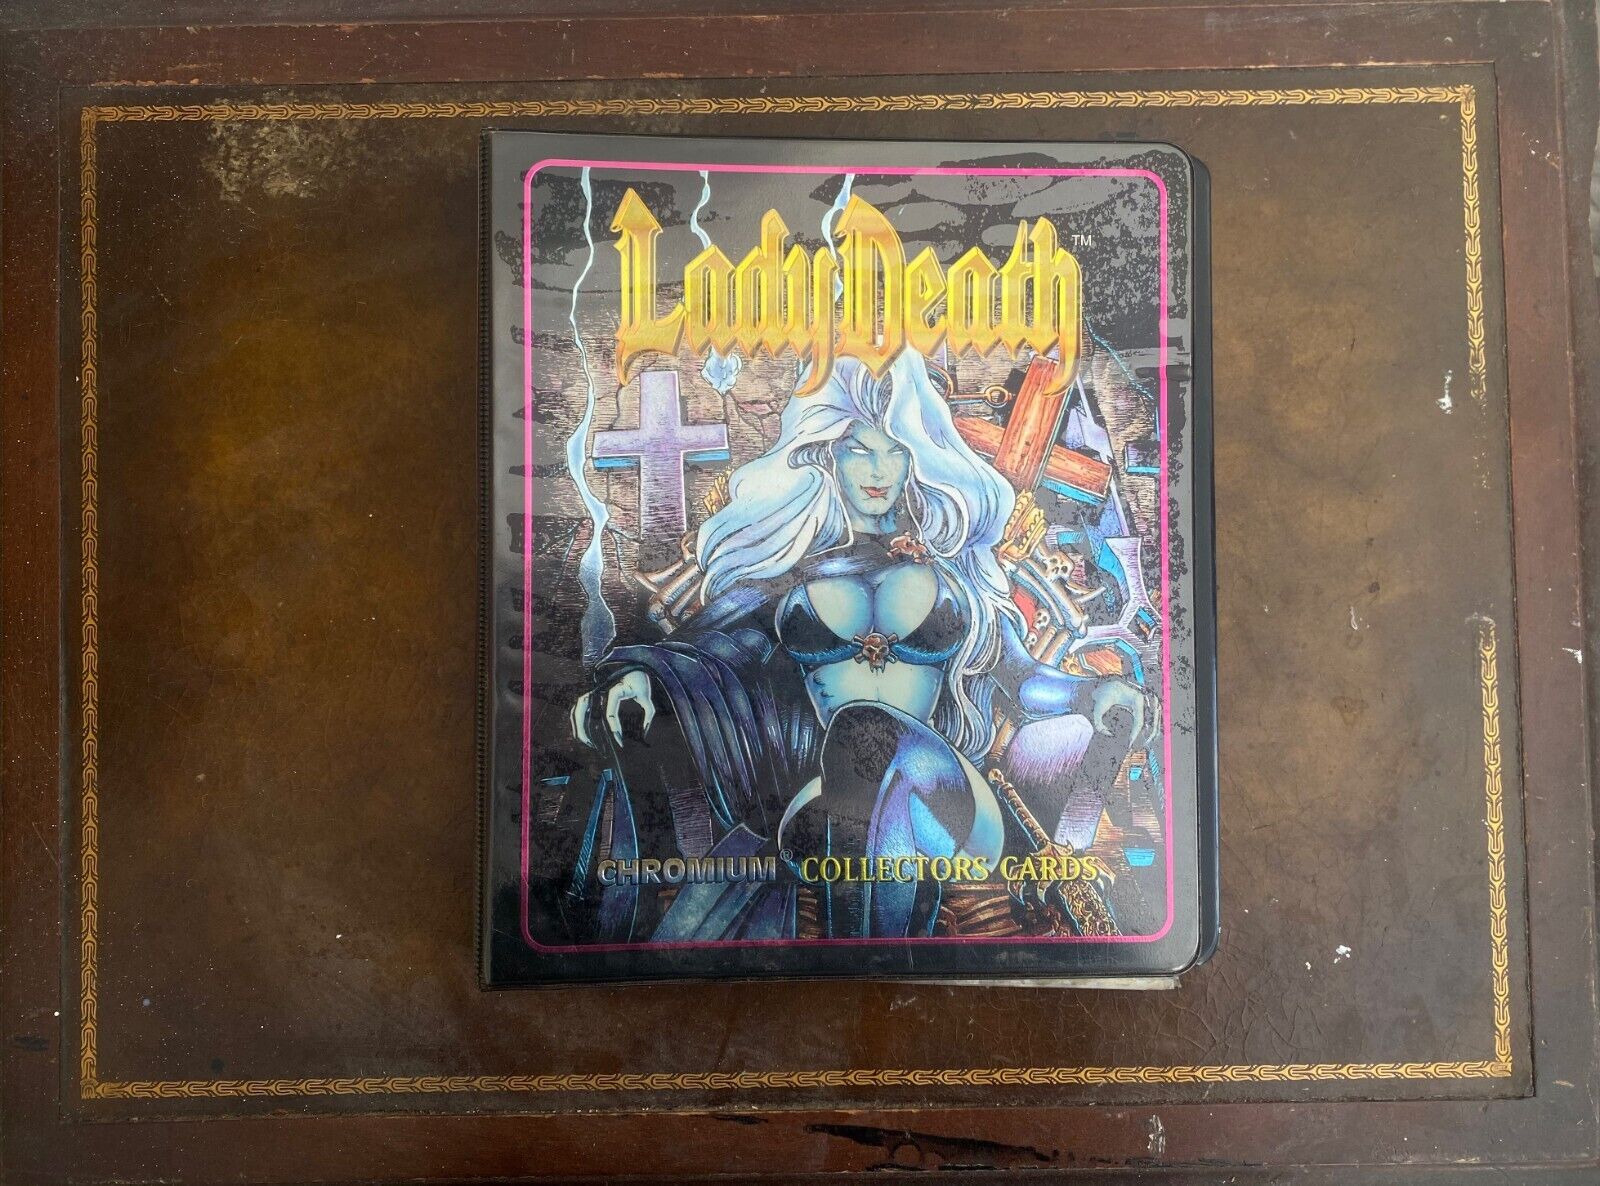 1995 Lady Death Trading Cards Mint Condition / Lady Death Collectors Binder USED